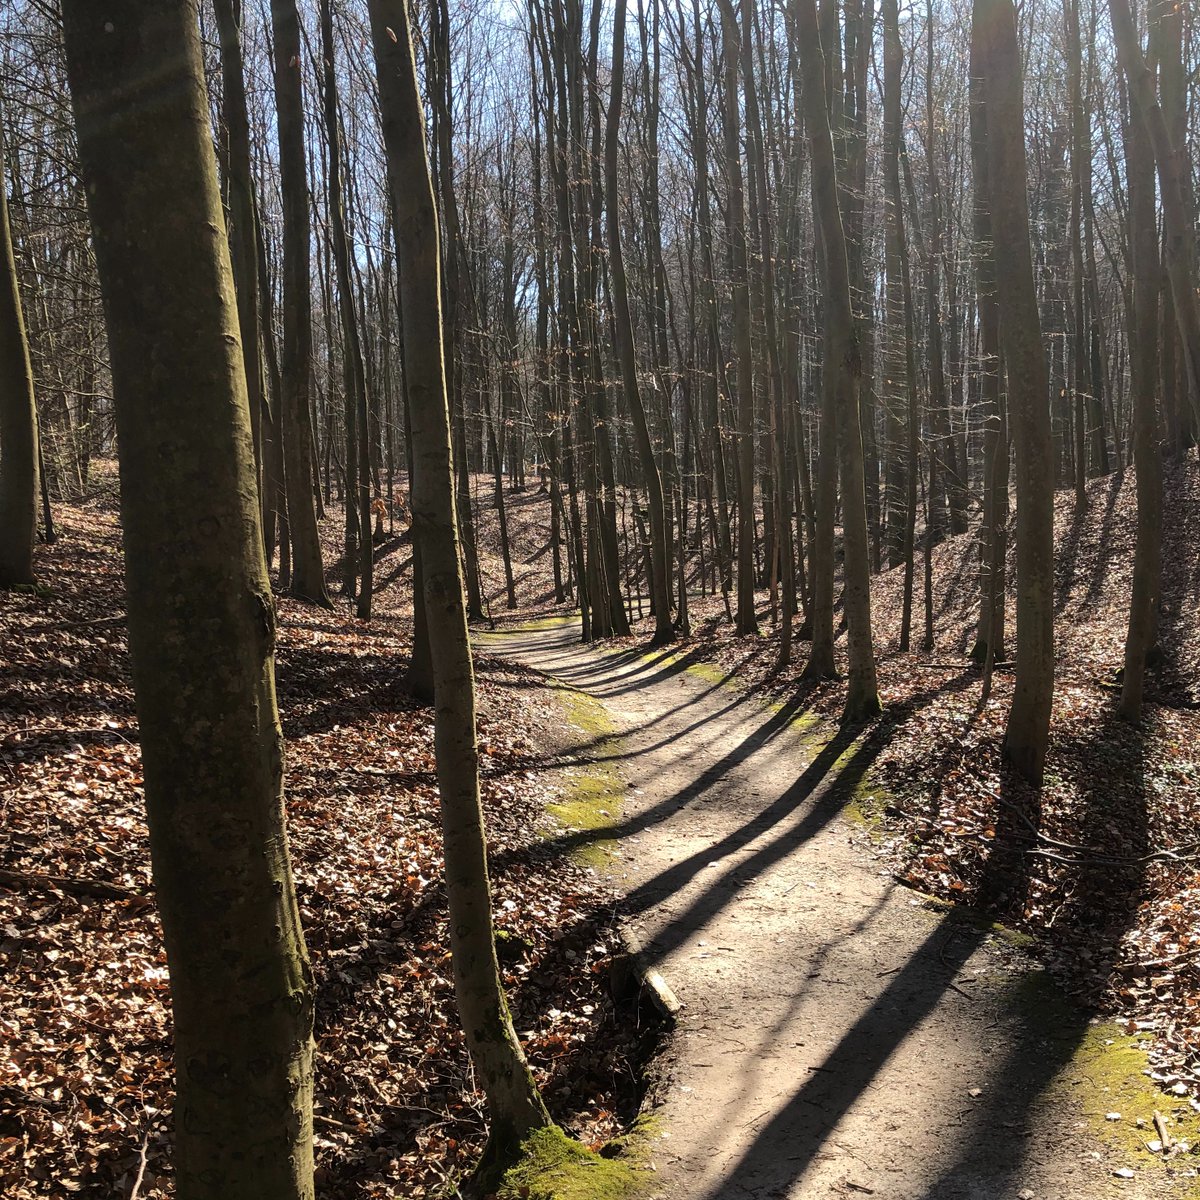 My picture of a trail in the Sonian Forest south of Brussels taken on 3/22/20. At this point, my 3/26/20 flight home had been cancelled. I would not get back to the USA until the first of May, but I managed two half marathons of my own design during the extension.